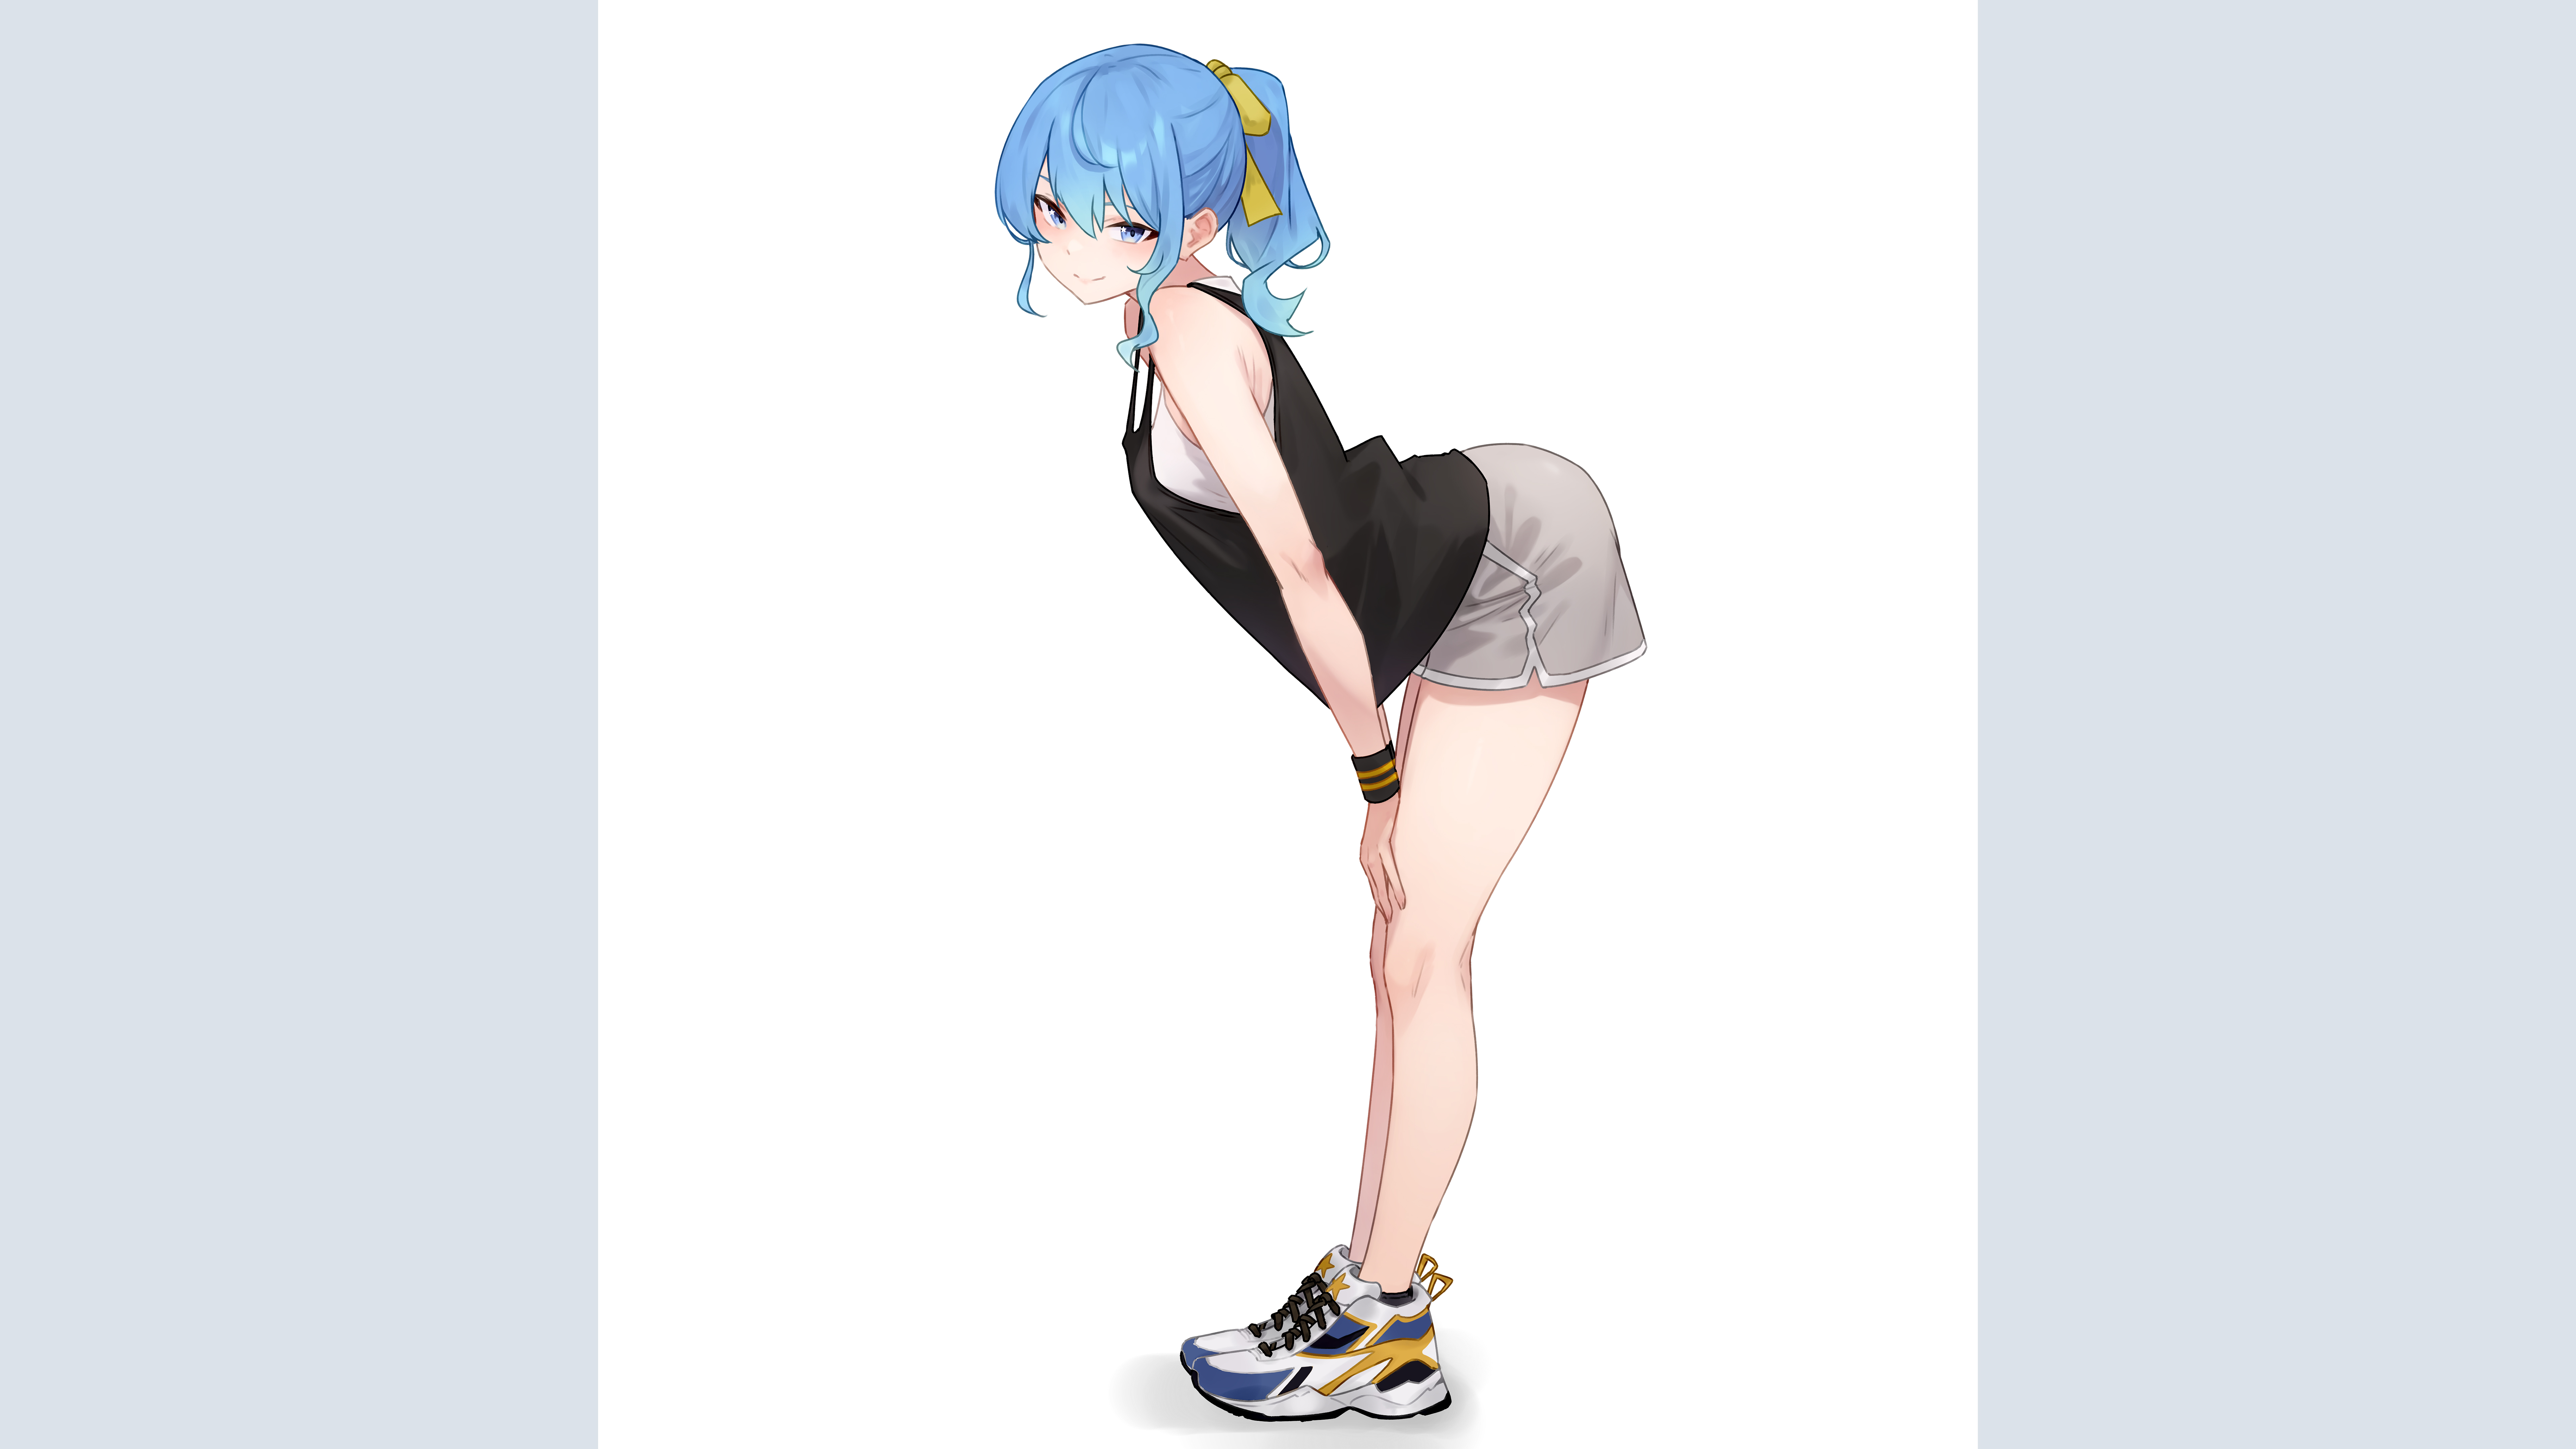 Anime 7680x4320 bluefield Hoshimachi Suisei Hololive Virtual Youtuber anime anime girls blue hair ponytail yellow ribbon blue eyes black top loose clothing grey shorts armband sneakers thighs bent over looking at viewer simple background light background athletic female digital art fan art artwork 2D